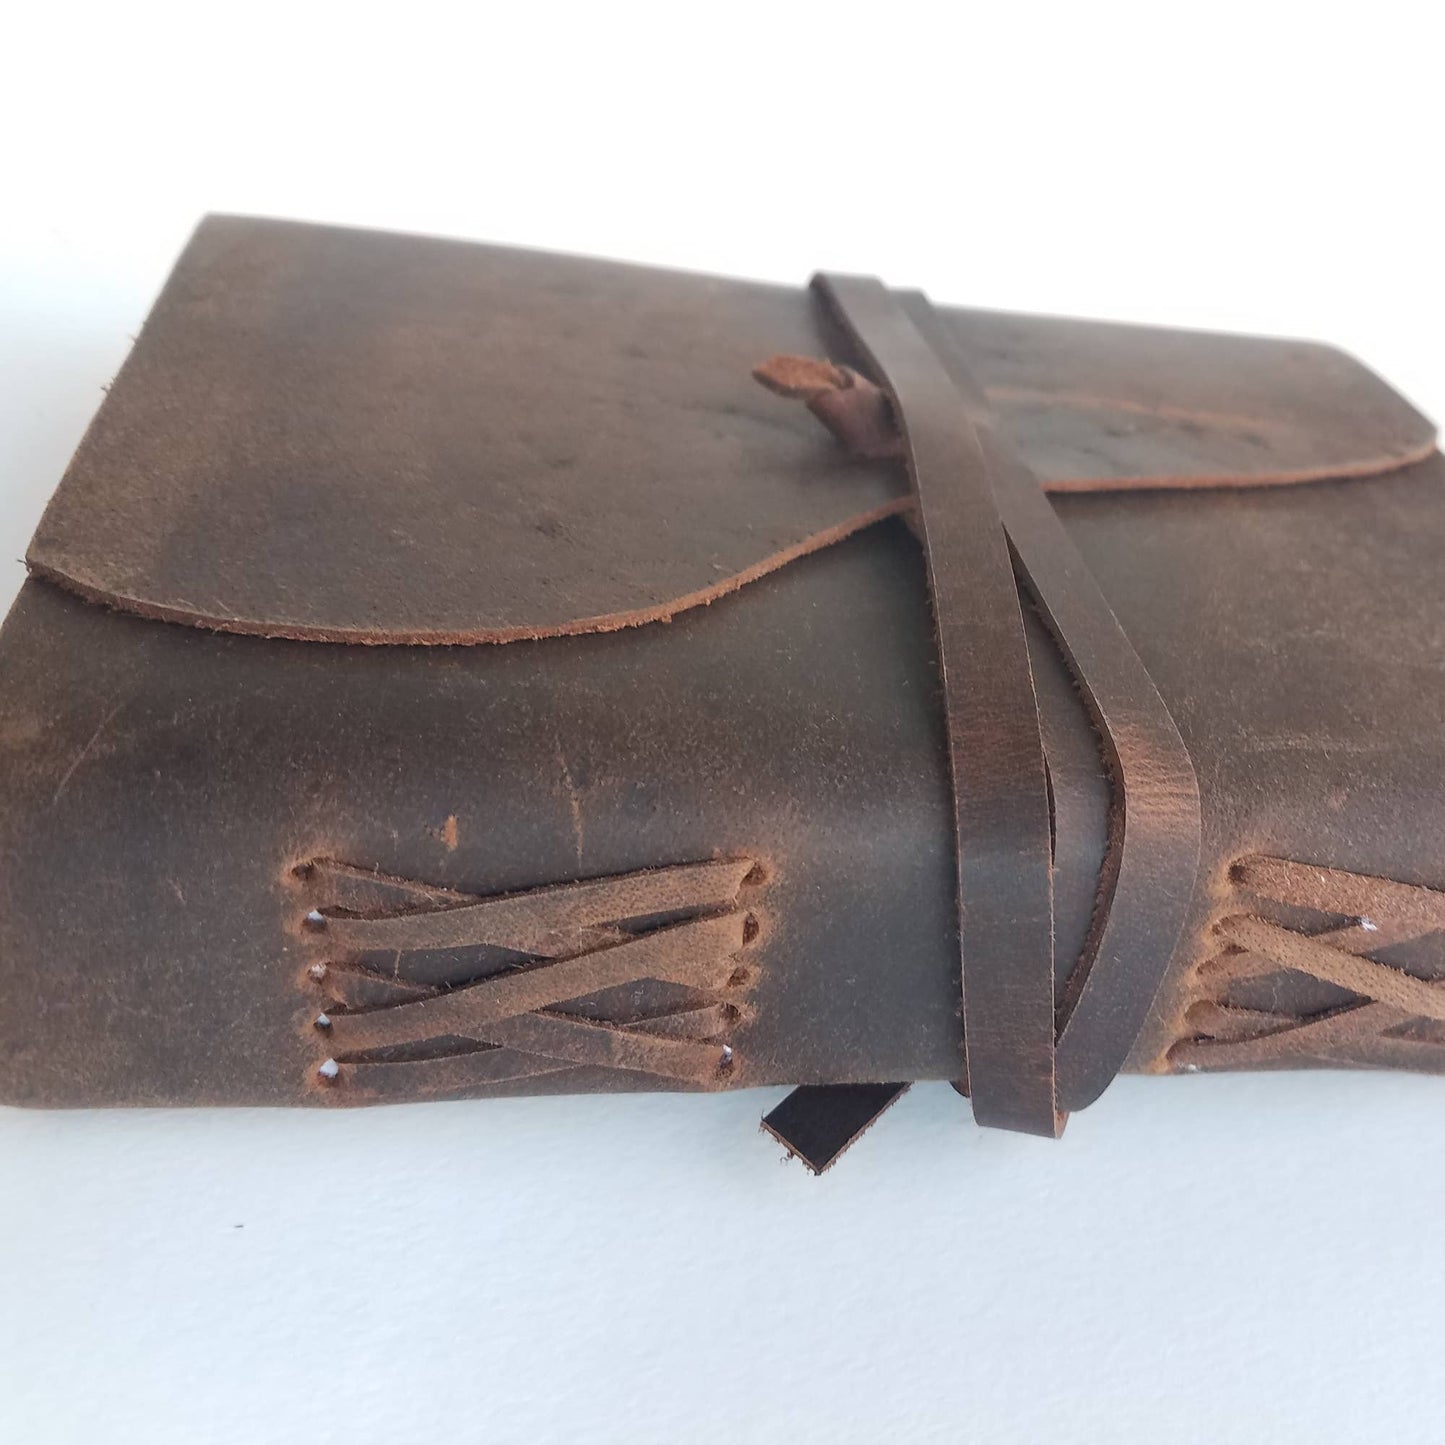 Welsh Dragon Leather Journal With Cord, Unlined Paper: Dark brown